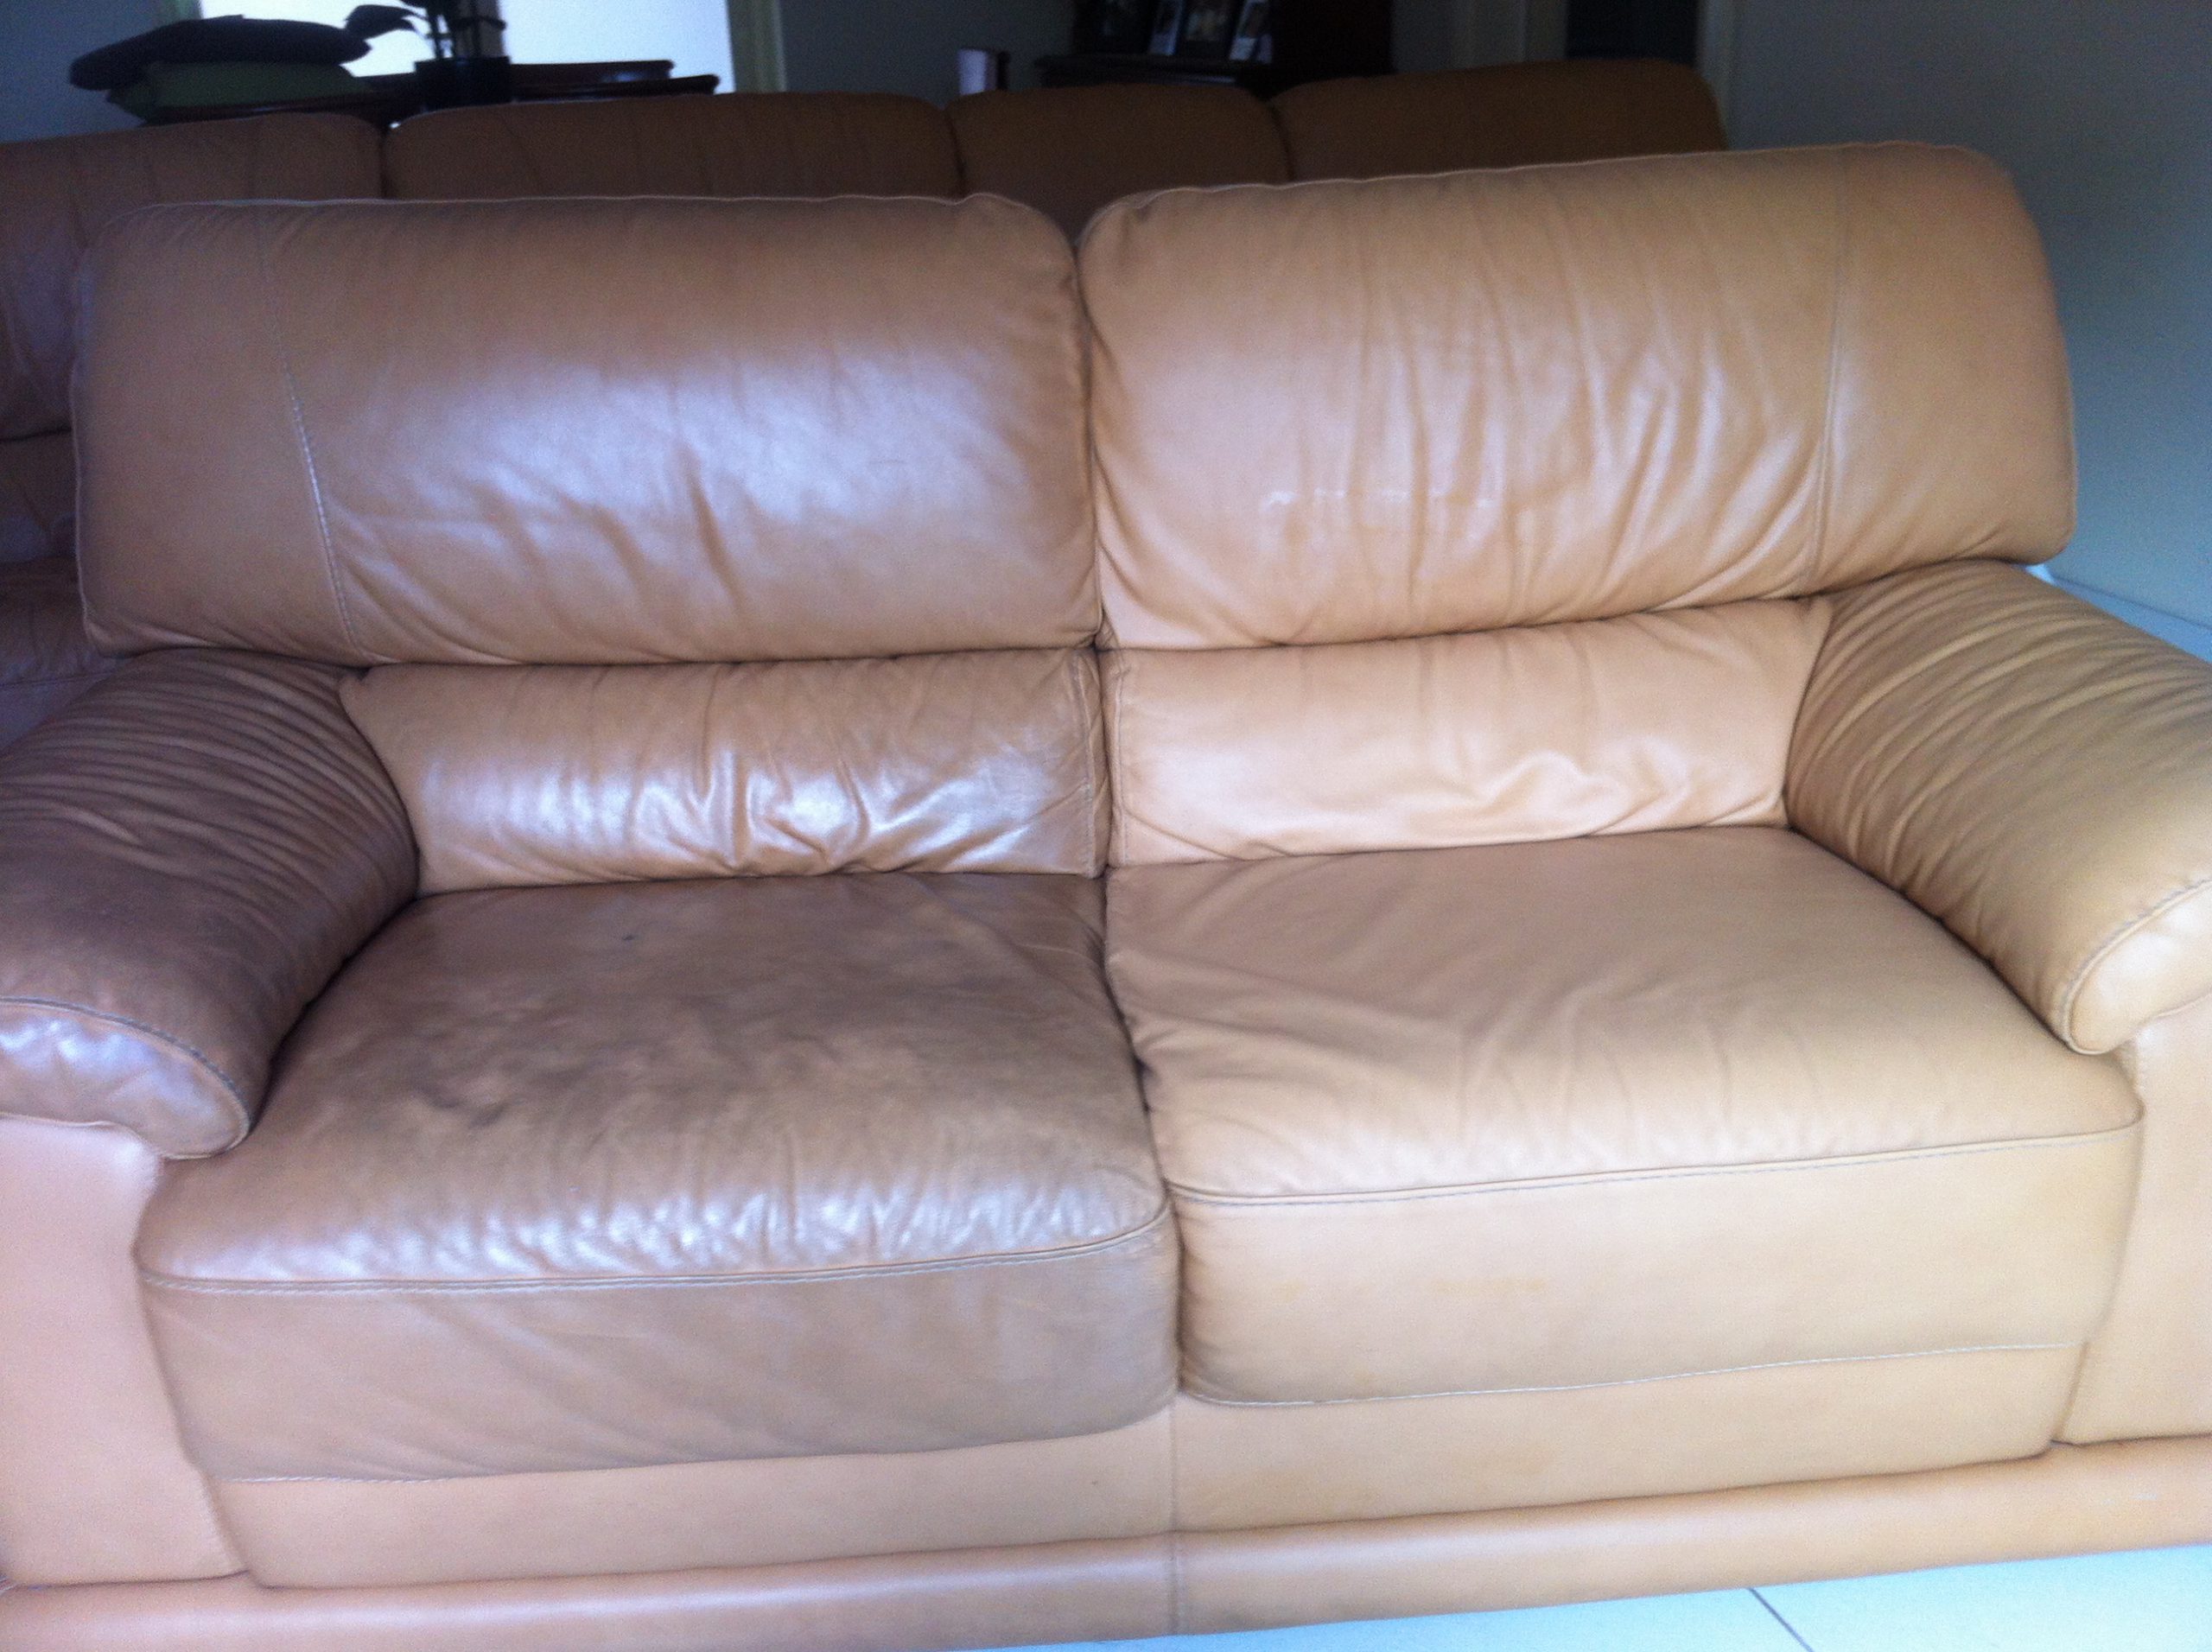 Half cleaned Brown leather couch by Priceless Carpet Cleaning